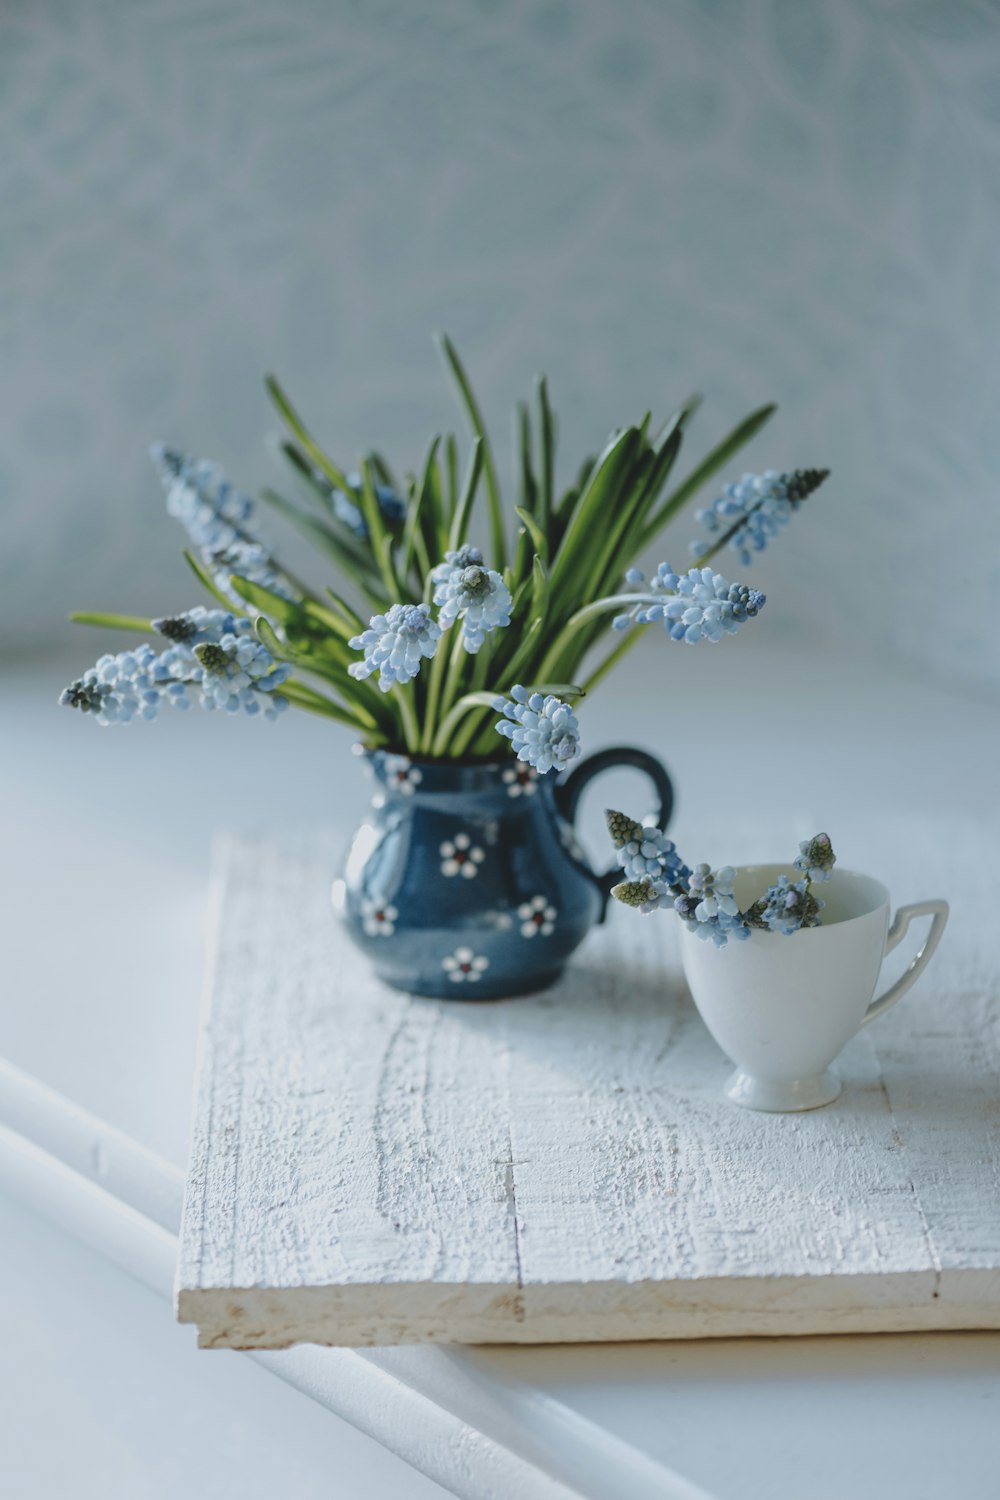 a blue vase filled with blue flowers next to a white cup